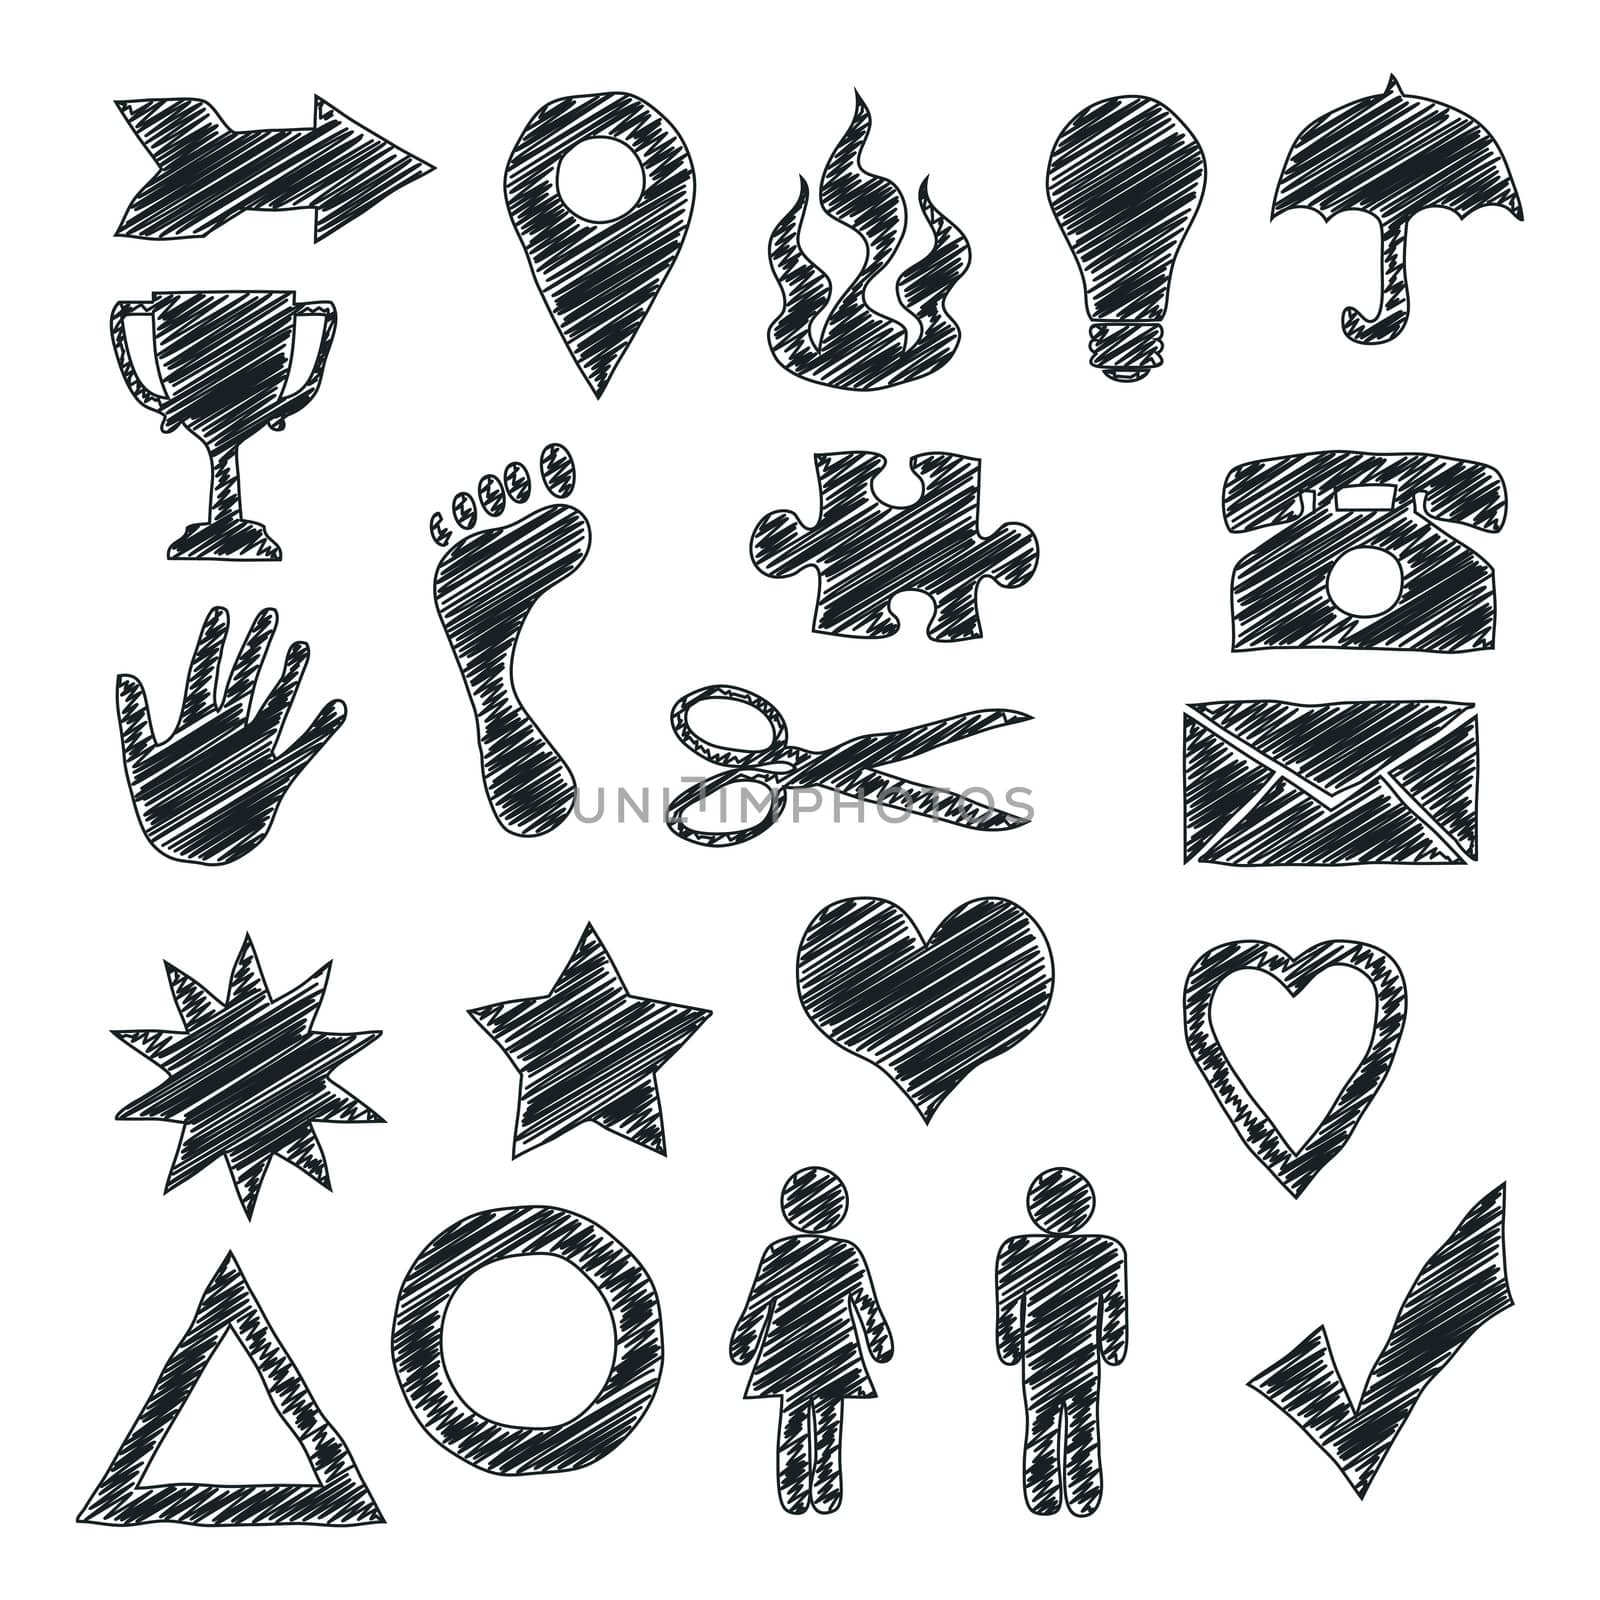 An image of some usefull scribble signs